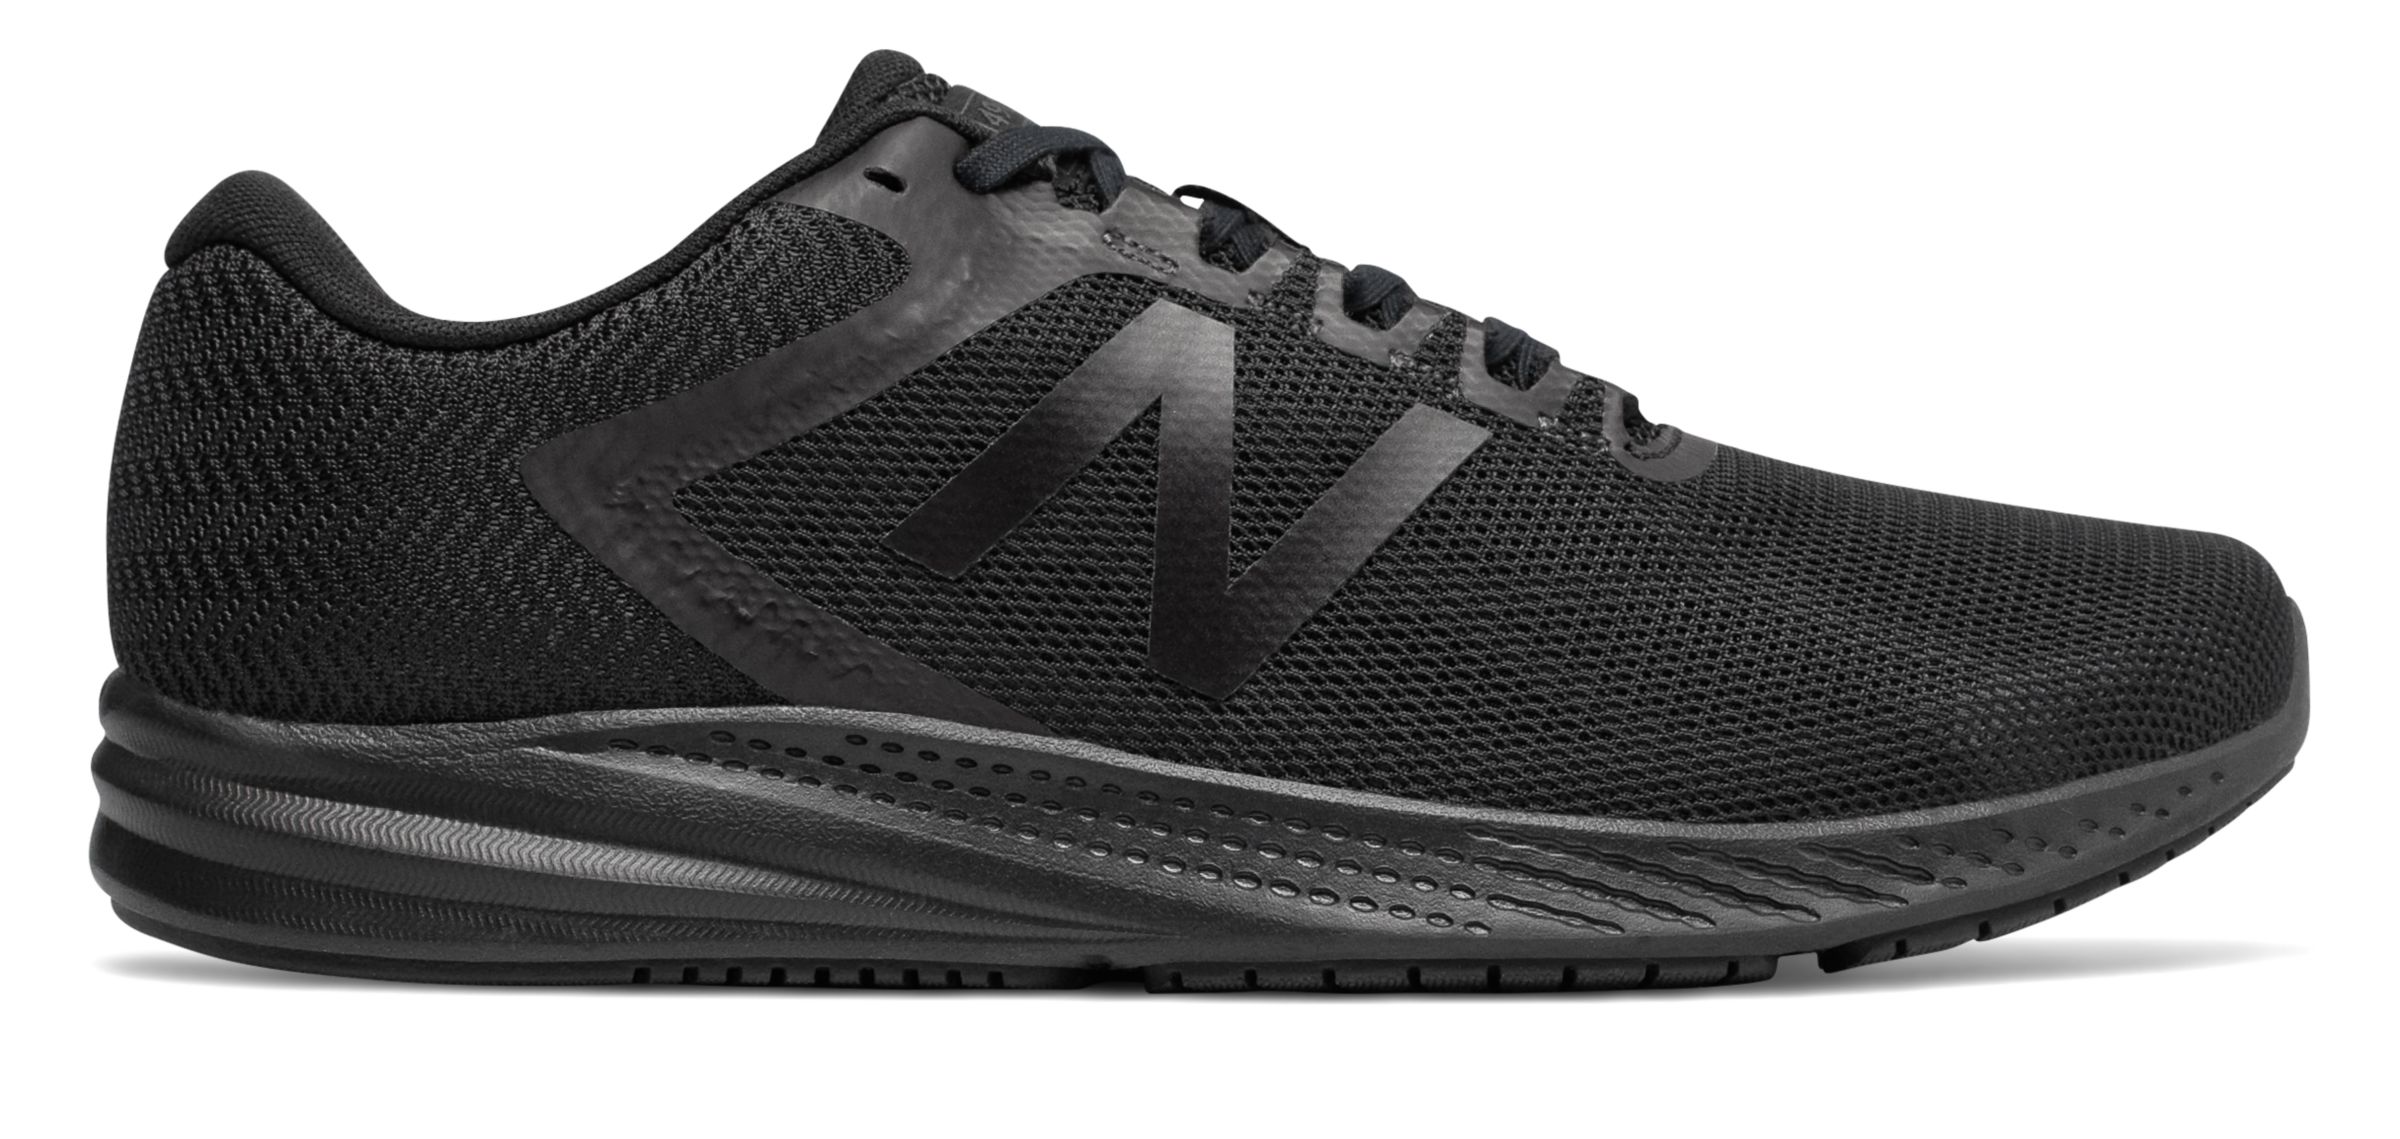 New Balance M490-V6 on Sale - Discounts Up to 59% Off on M490LB6 at Joe's  New Balance Outlet